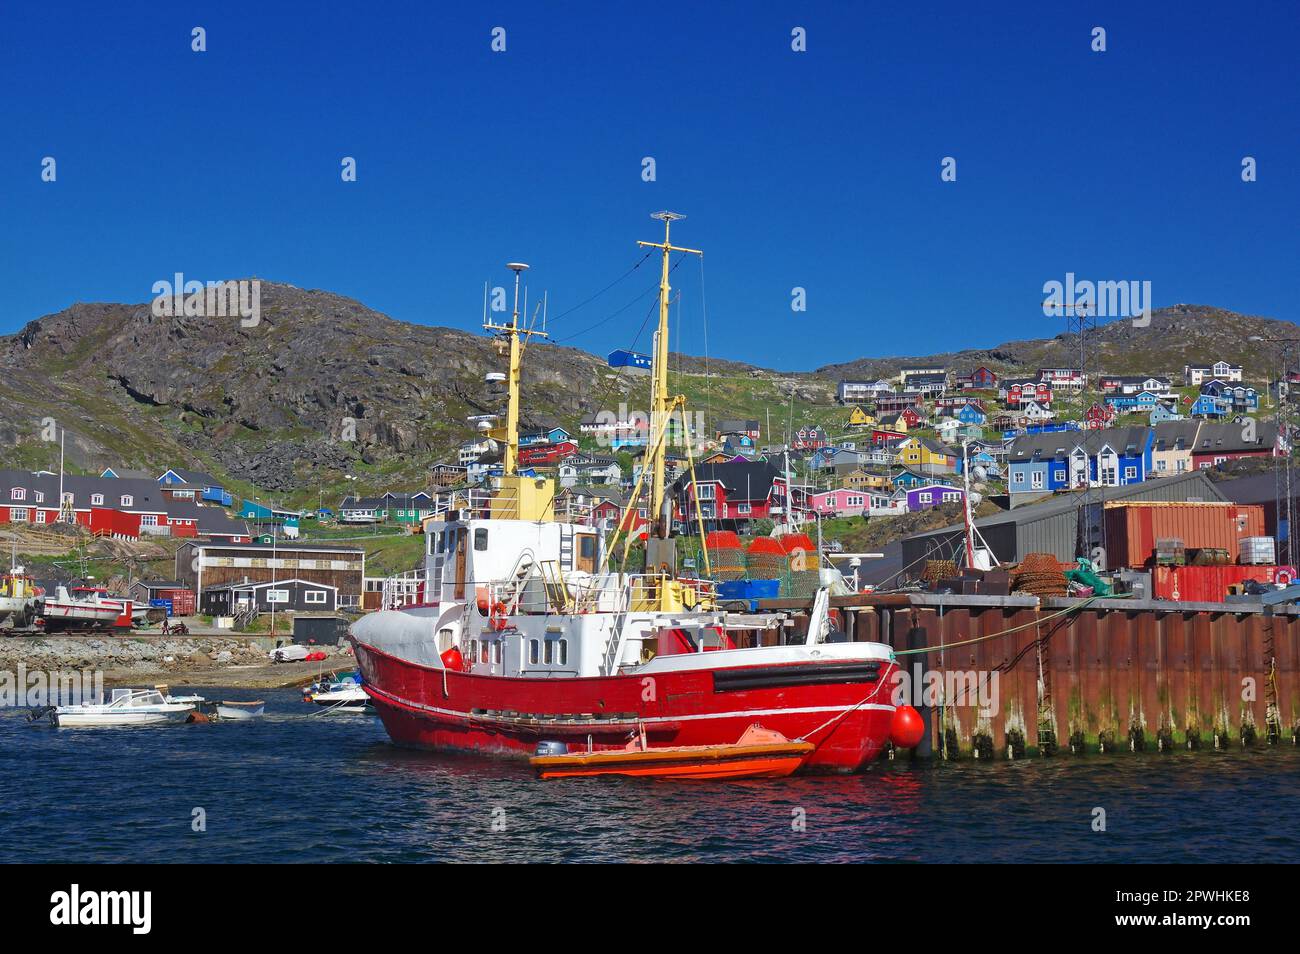 Fishing vessel and small boats, harbour and colourful houses, Qaqortoq, Kujalleq Municipality, Greenland, Denmark Stock Photo